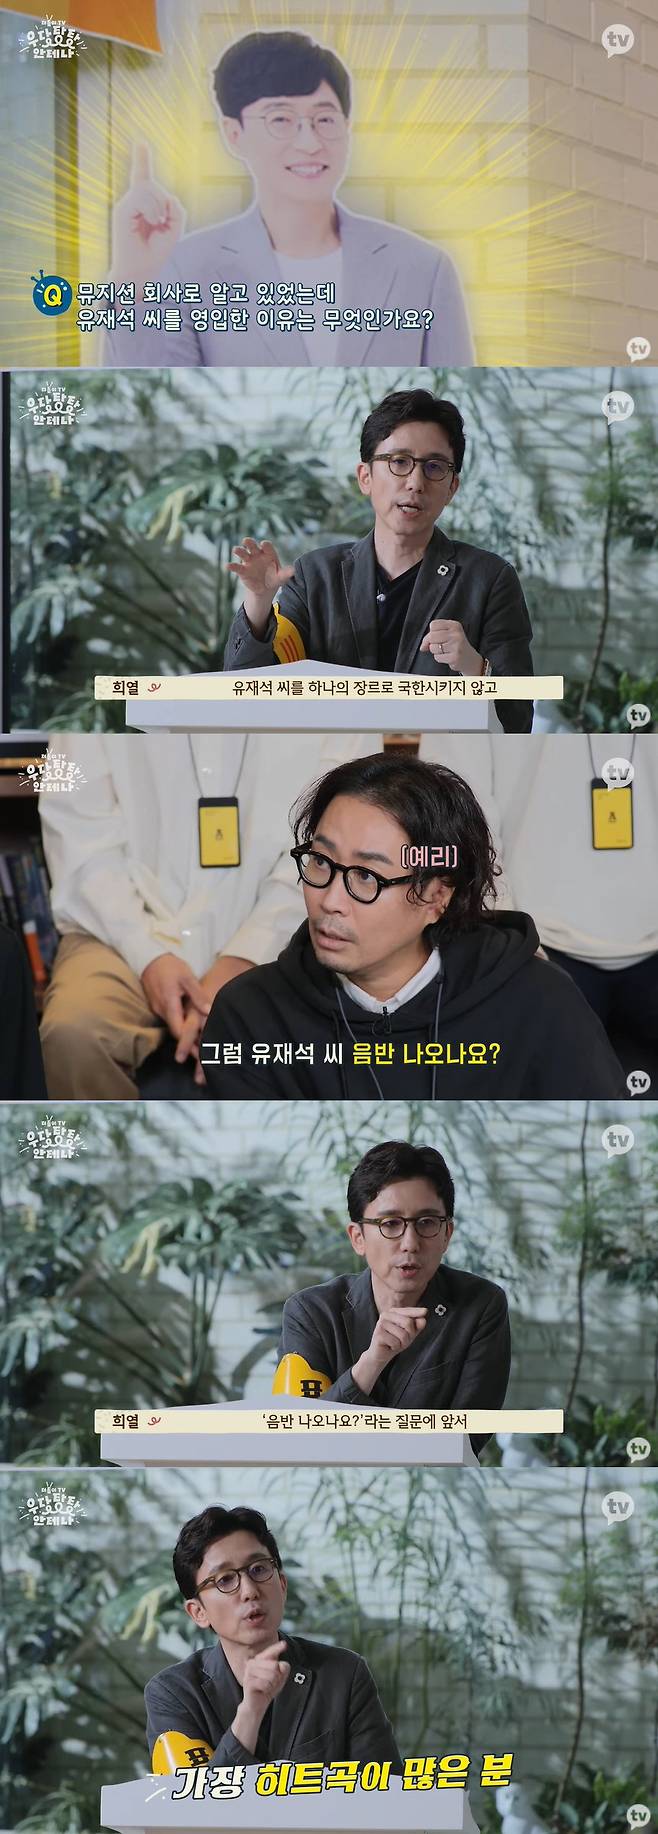 Udangtang Antenna You Hee-yeol reveals why he recruited Yoo Jae-SukOn the 4th, Kakao TV entertainment Udangtangtang Antenna 2nd, Antenna opening ceremony followed.Representative You Hee-yeol had time to gather the artists of Antenna and solve the questions.Asked why he recruited Mr. Yoo Jae-Suk, you Hee-yeol said, I knew it as a Lee Su-hyun company, but I see Yoo Jae-Suk as a Creator without limiting it to one genre.Likewise, our artists are not just looking at Lee Su-hyun, but thinking of it as a Creator. Jung Jae Hyung asked, Do you play the Yoo Jae-Suk record? And You Hee-yeol laughed when he answered Are you playing the album? (Yoo Jae-Suk is the most hit song among the Antenna The Artists) before the question Is it a record?You Hee-yeol asked Jung Jae Hyung, Lee One, to answer, I told you that you would give Mr. Yoo Jae-Suk a rant.Jung Jae Hyung and One in the webentertainment Shooting Today are good to make the house tax referring to the exclusive contract of Yoo Jae-Suks Antenna.I was trying to get a little airflow, said One. Im sorry.Where is the garden tax? And You Hee-yeol added, Before I came, Mr. Yoo Jae-Suk talked to me on the phone and said he would watch.